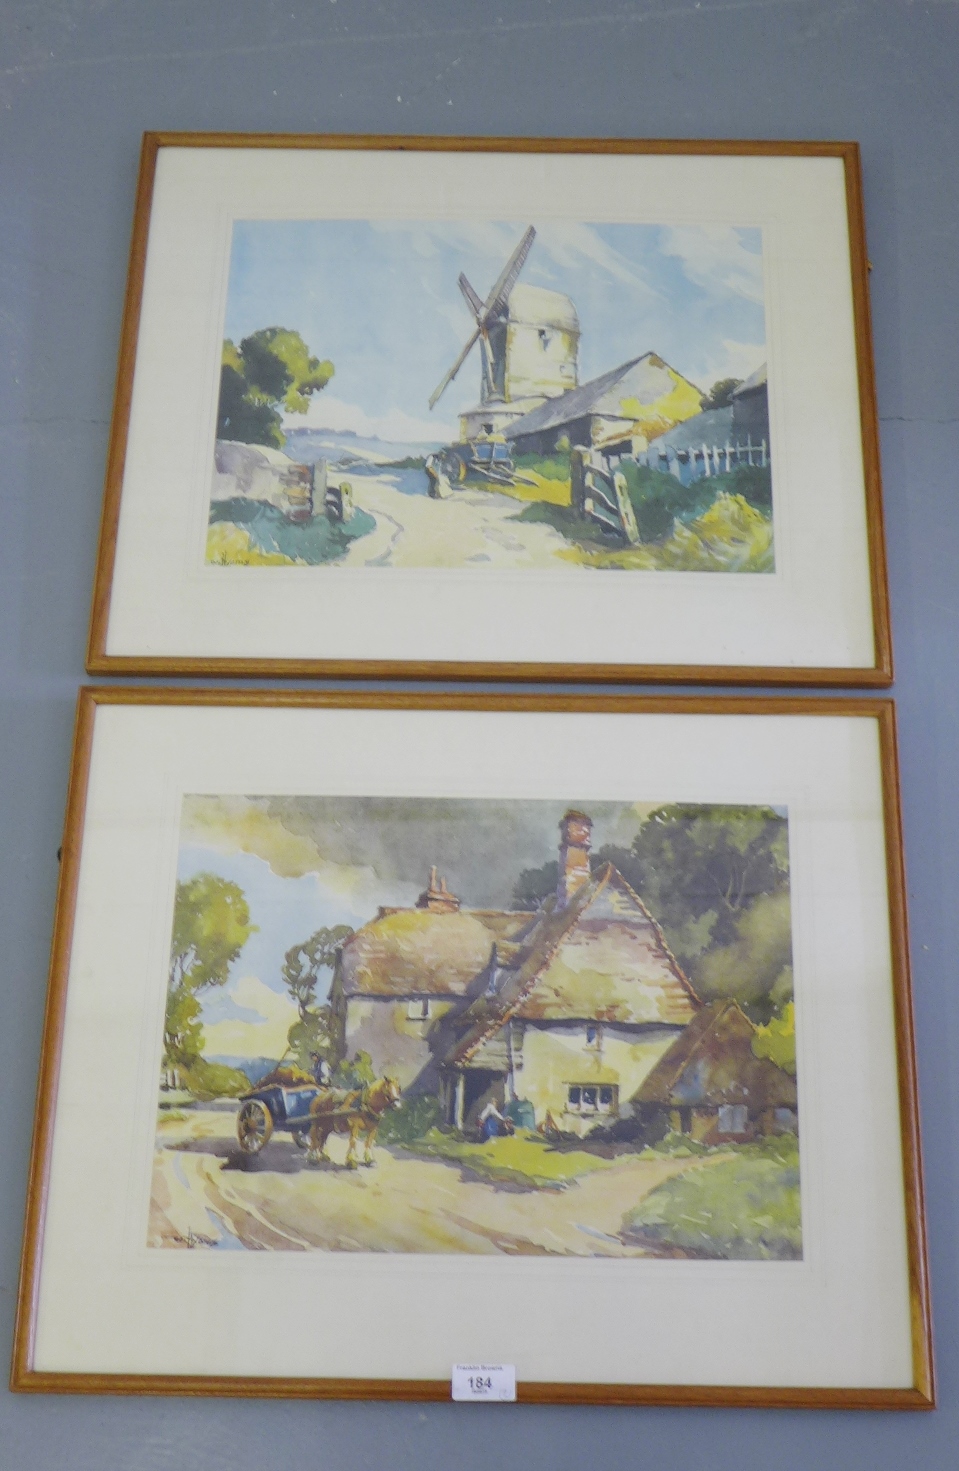 After R. Hyams, a companion pair of framed prints - 'The Windmill' and 'Kentish Cottage' (2)